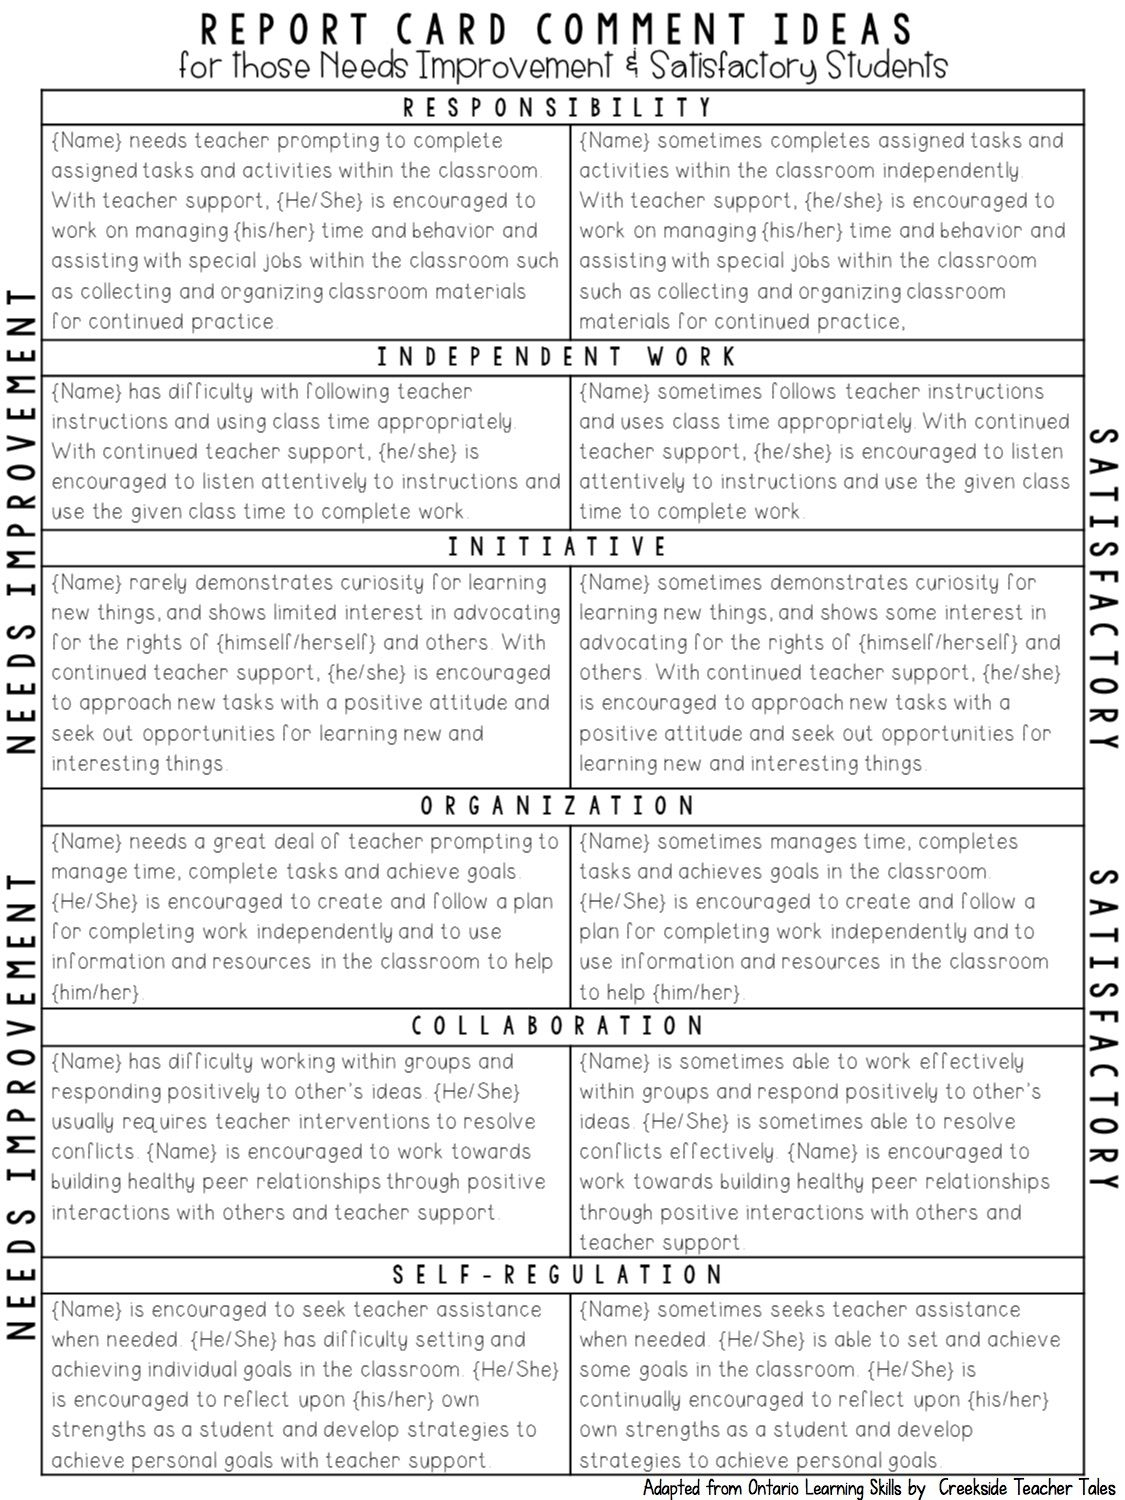 Tips For Not Letting Report Cards Get You Down | Assessment - Free Printable Report Card Comments